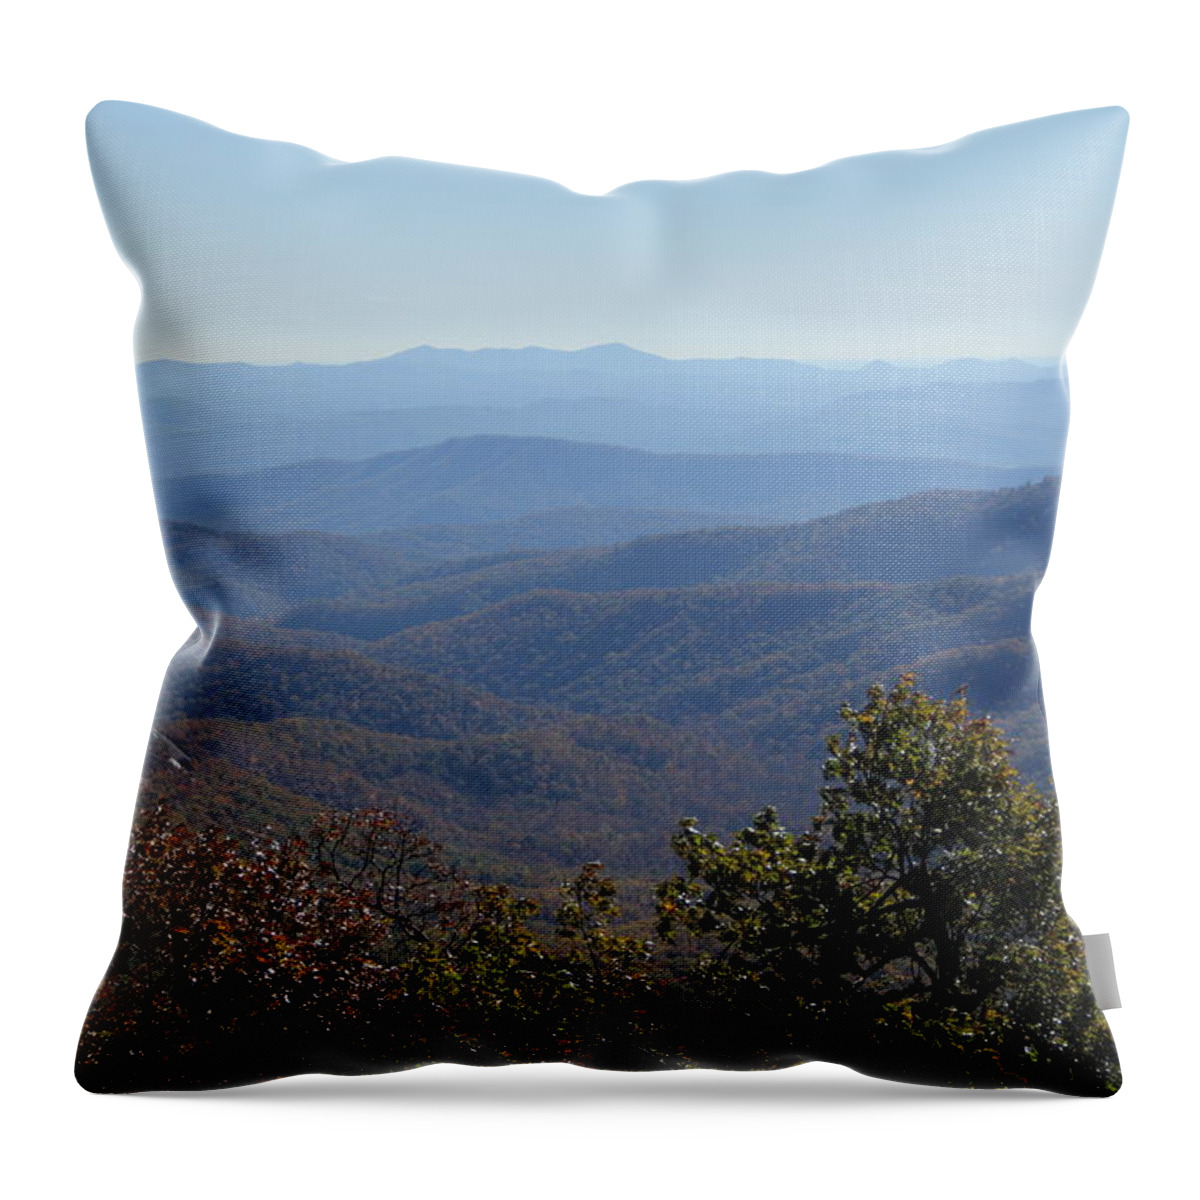 Mountains Throw Pillow featuring the photograph Mountain Landscape 4 by Allen Nice-Webb